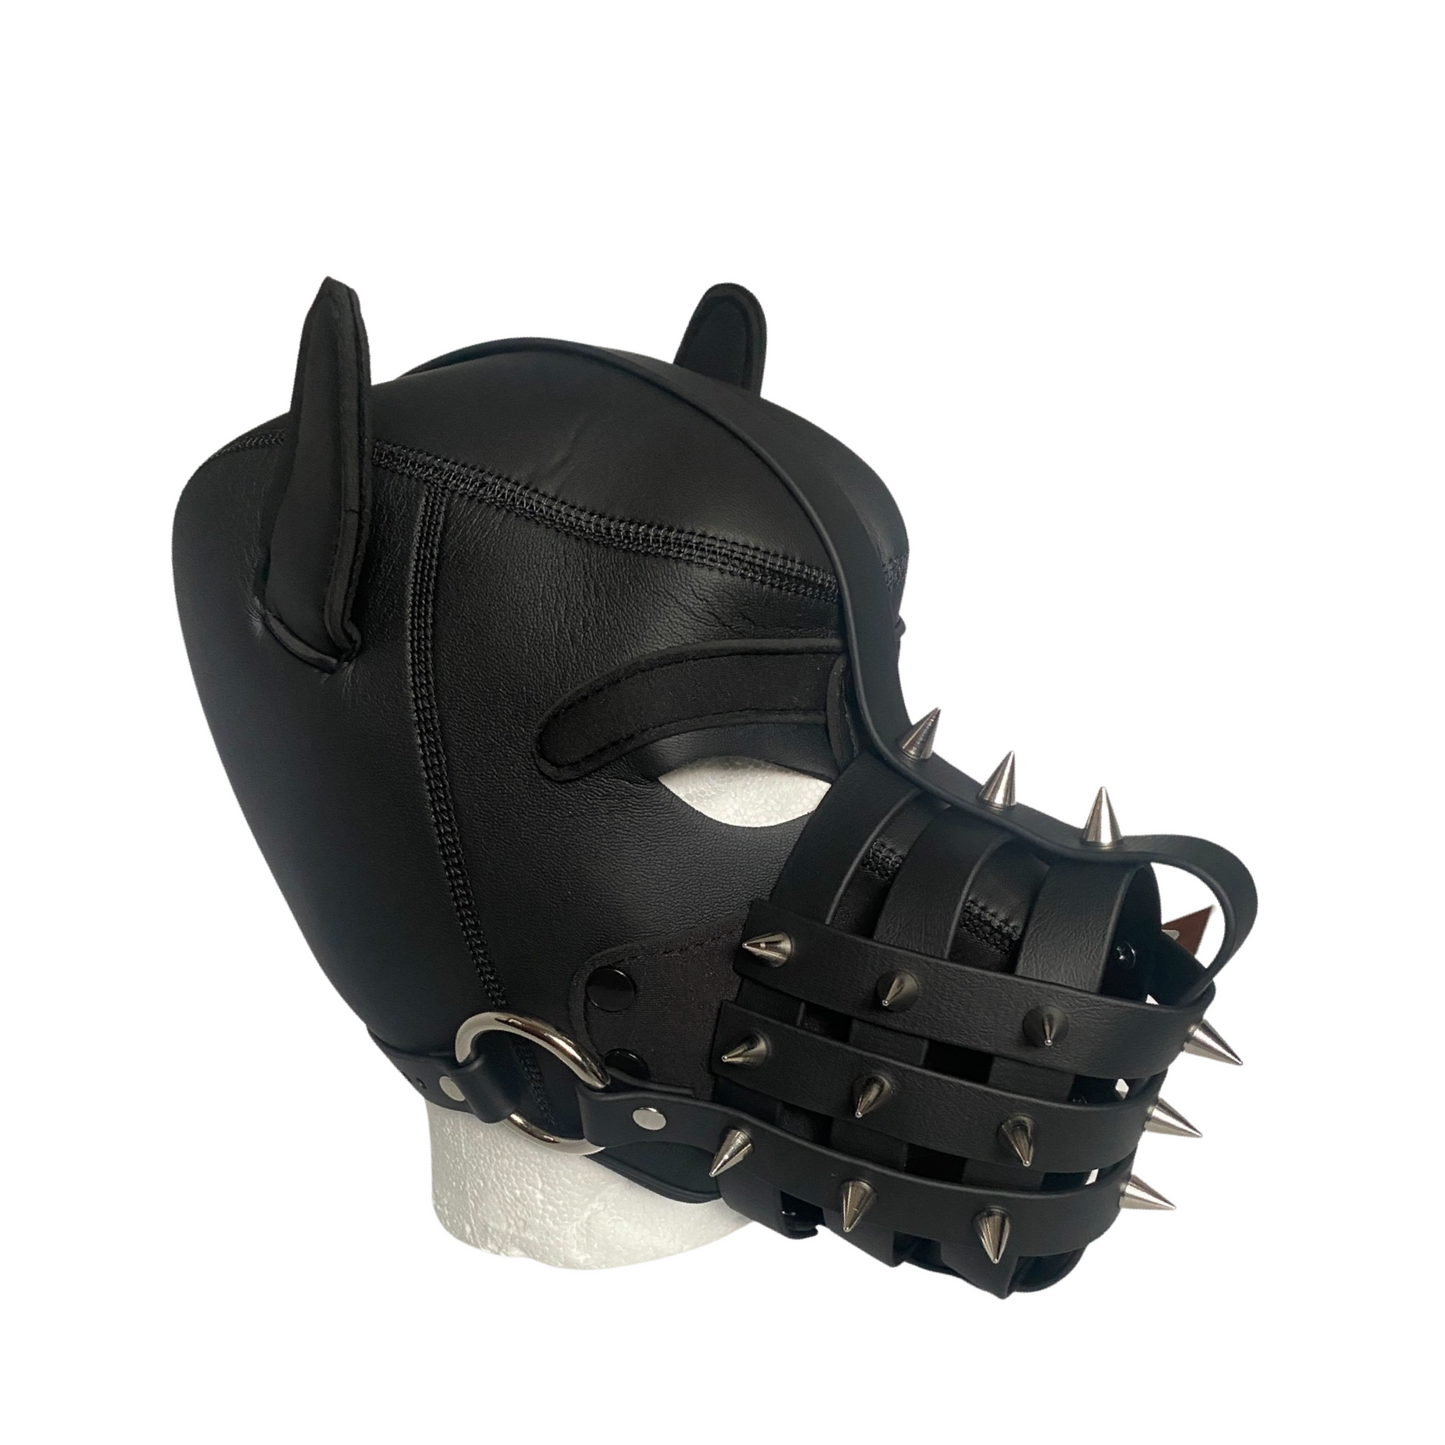 Vegan Human Puppy Play Muzzle - With Spikes